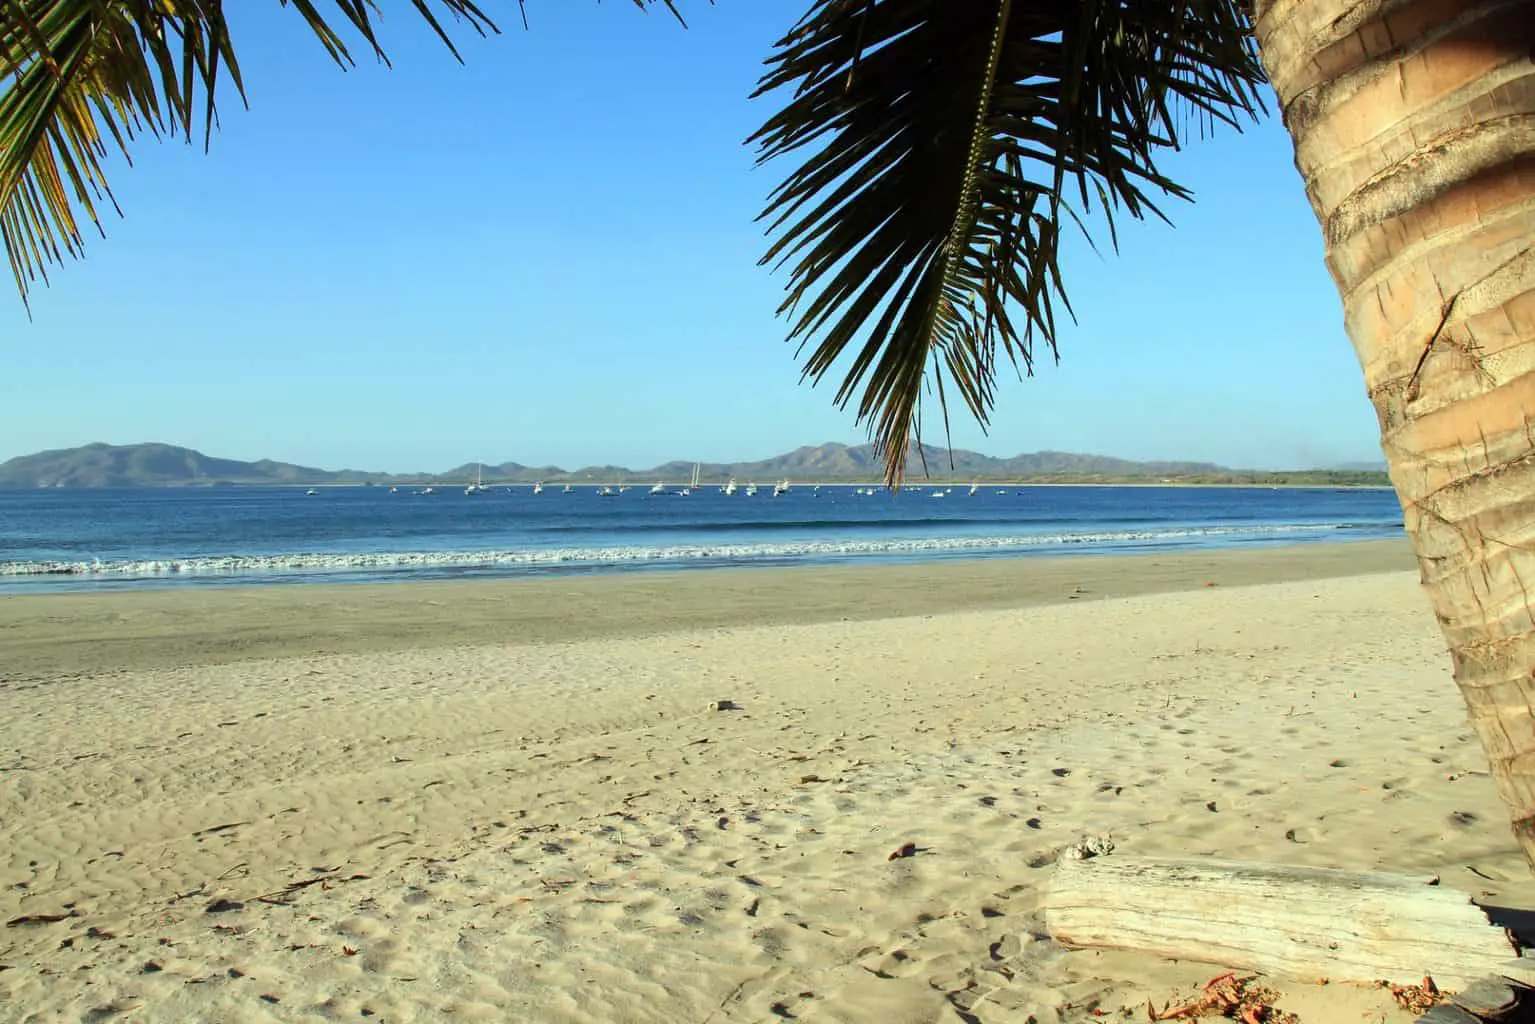 The 10 Best Things To Do in Tamarindo, Costa Rica